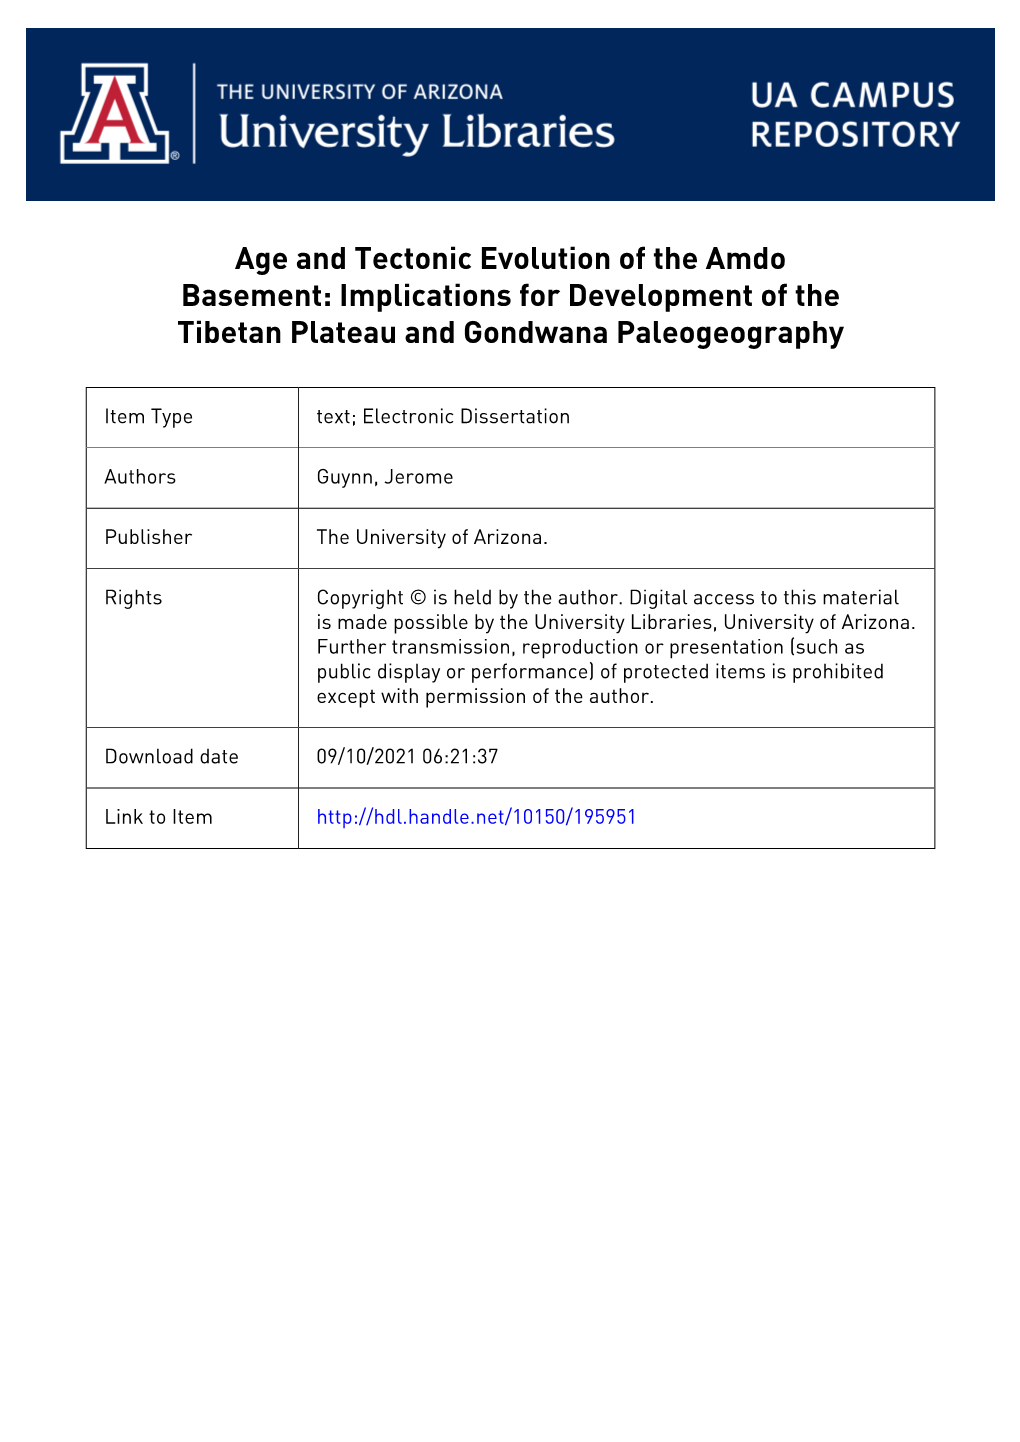 Age and Tectonic Evolution of the Amdo Basement: Implications for Development of the Tibetan Plateau and Gondwana Paleogeography